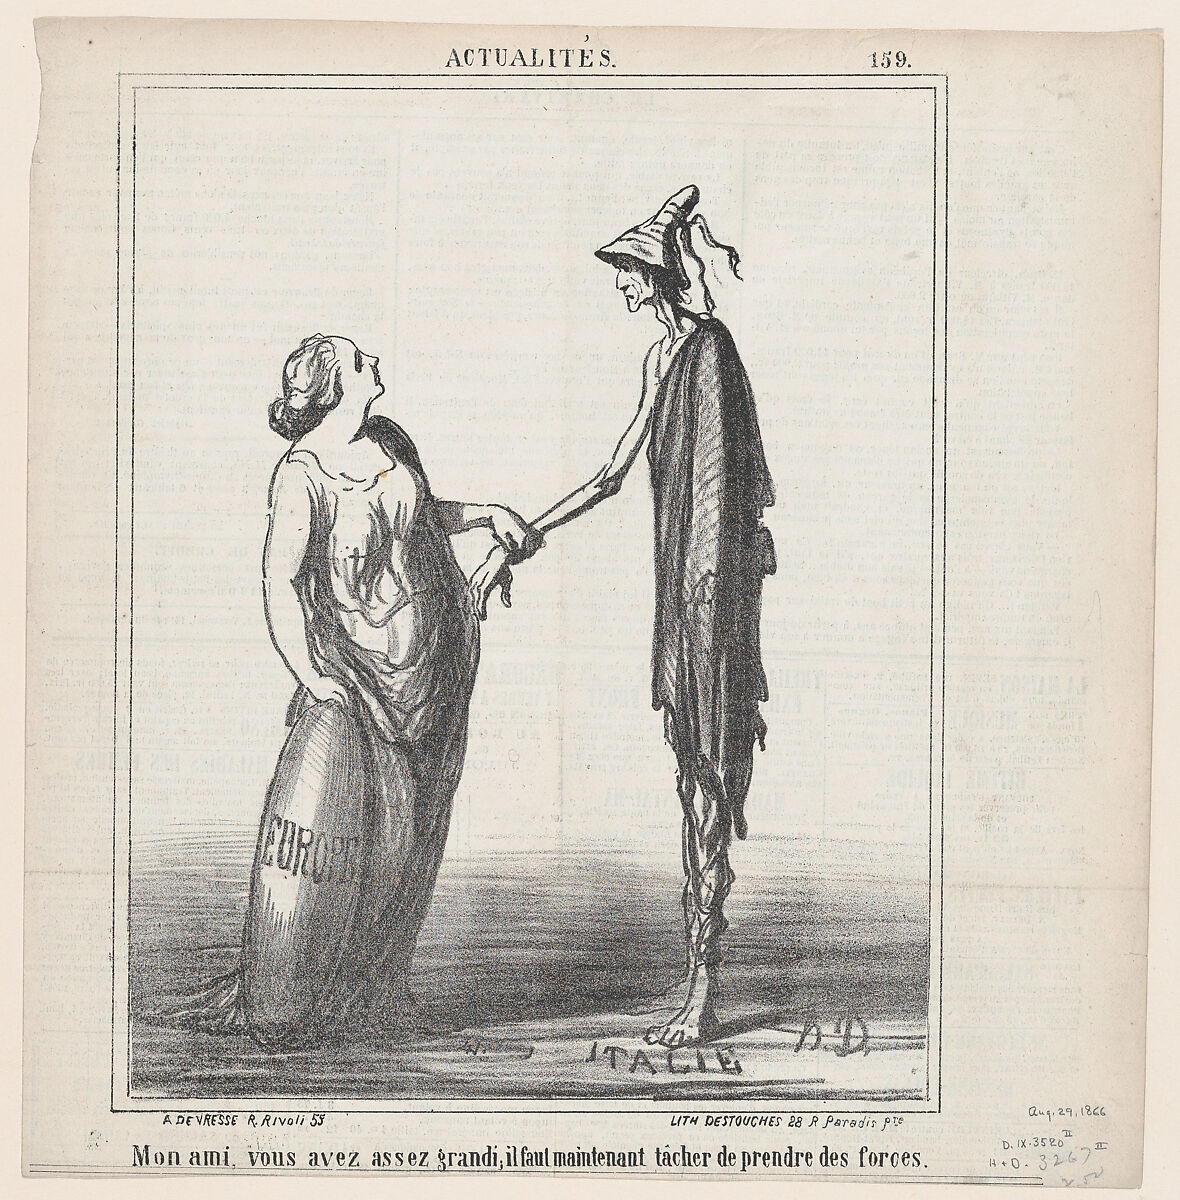 My friend, you are tall enough; but now you must try to put on some weight!, from 'News of the day,' published in Le Charivari, August 29, 1866, Honoré Daumier (French, Marseilles 1808–1879 Valmondois), Lithograph on newsprint; second state of two (Delteil) 